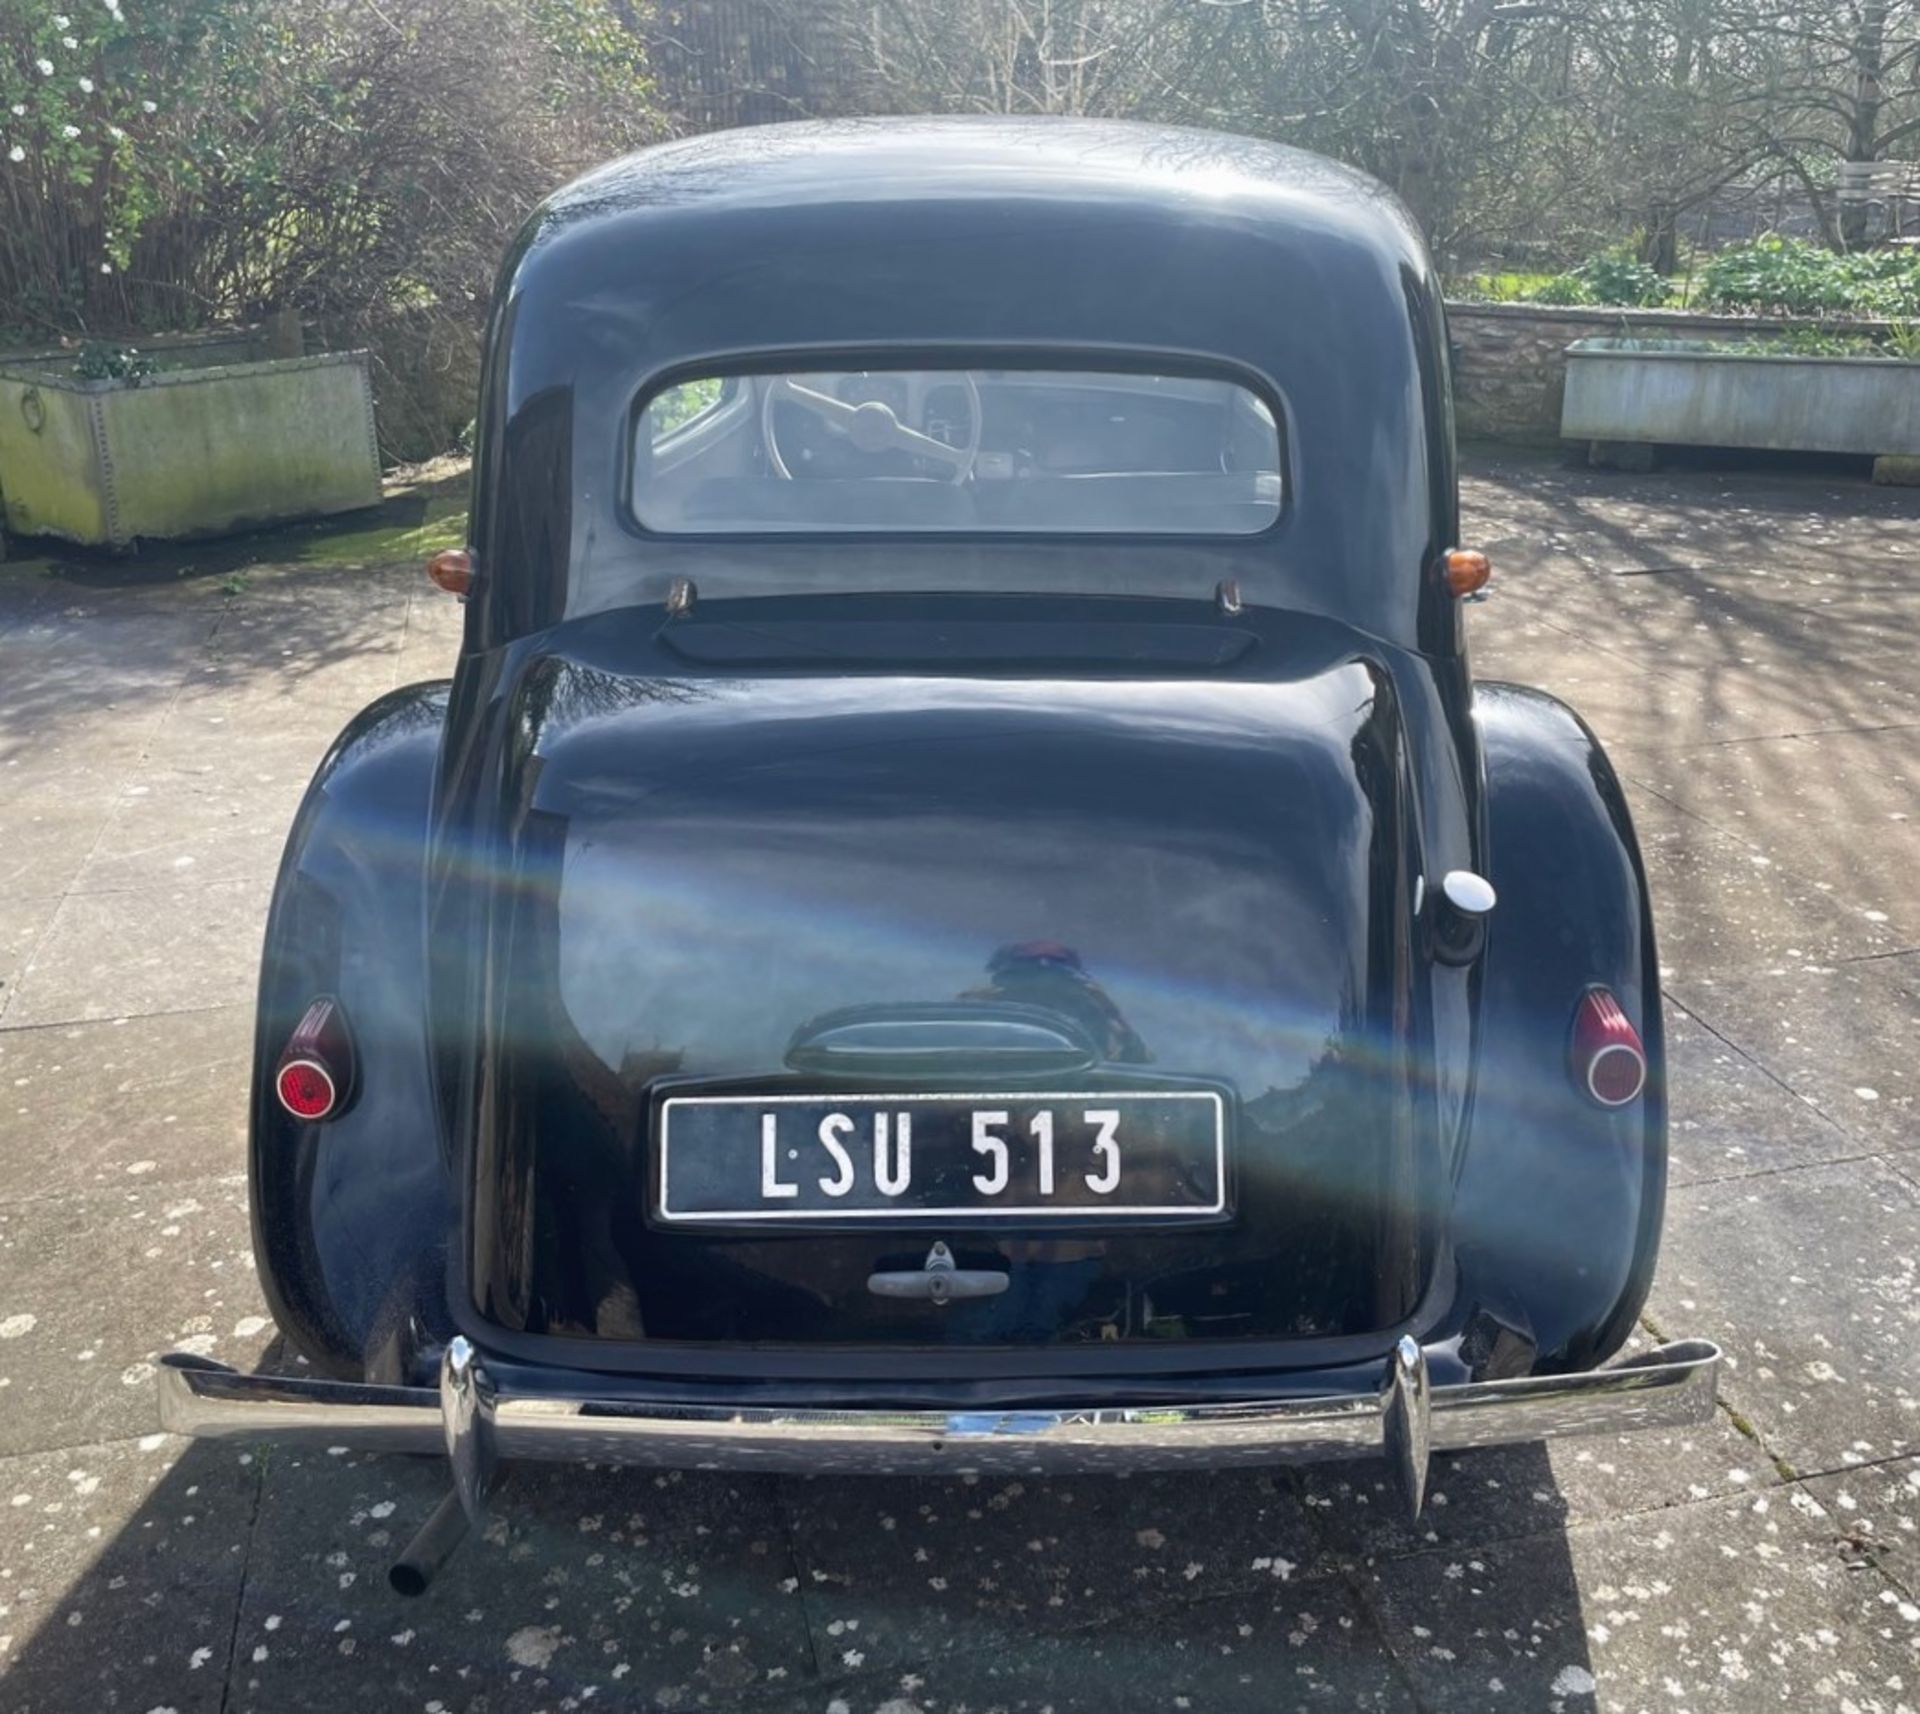 1956 CITROEN TRACTION AVANT 11BL ‘MALLE BOMBE’ Registration Number: LSU 513 Chassis Number: TBA - Image 6 of 14